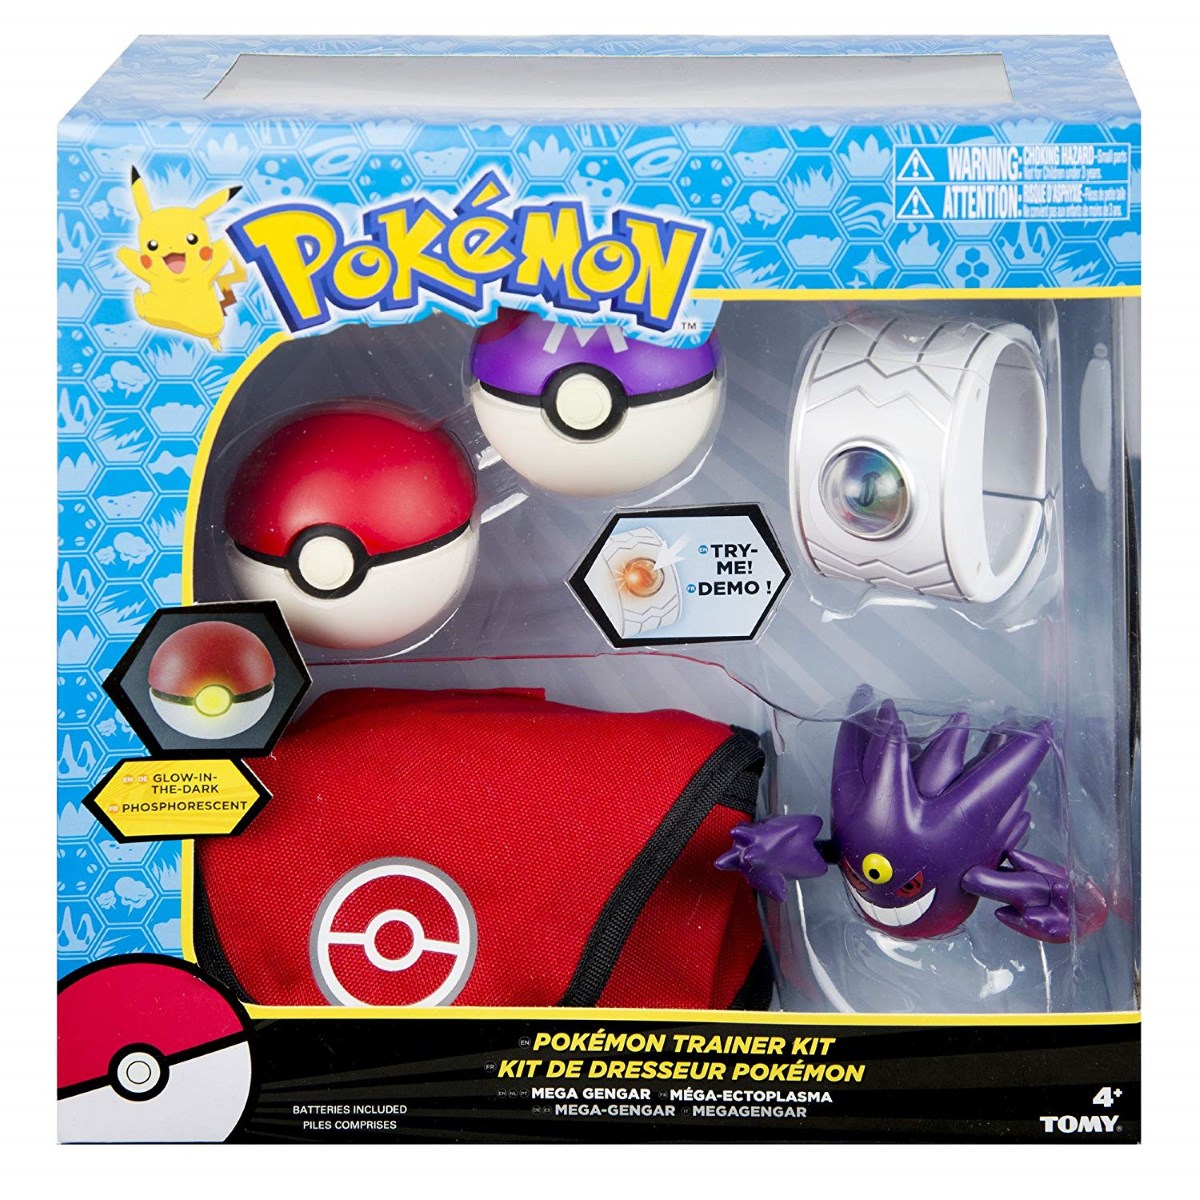 Pokemon Trainer Complete Role Play Kit | Action Toys, Figures